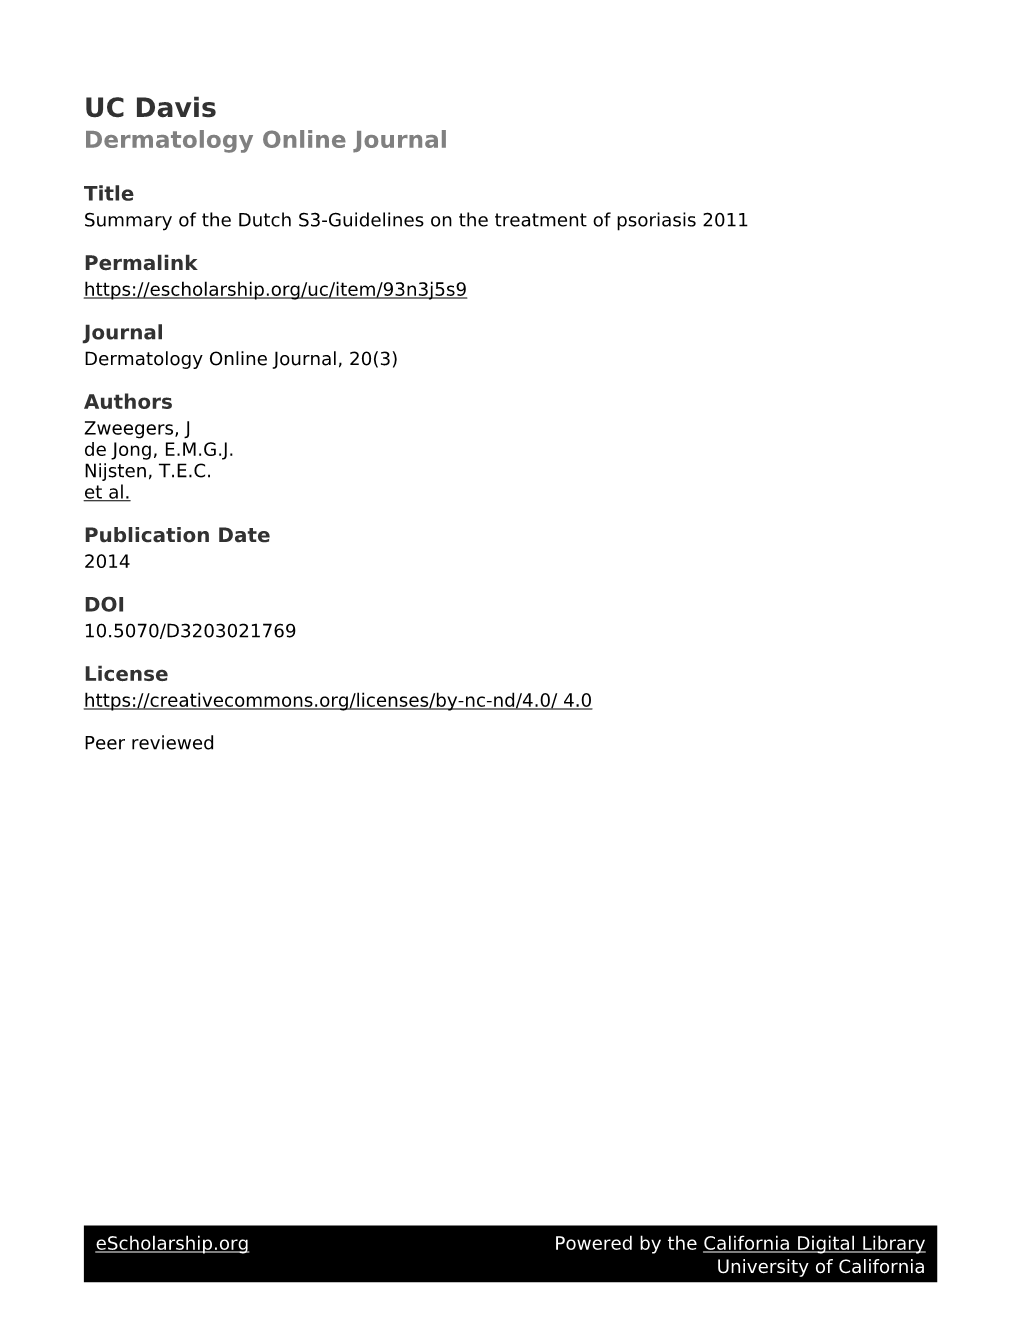 Summary of the Dutch Guidelines on the Treatment of Psoriasis 2011